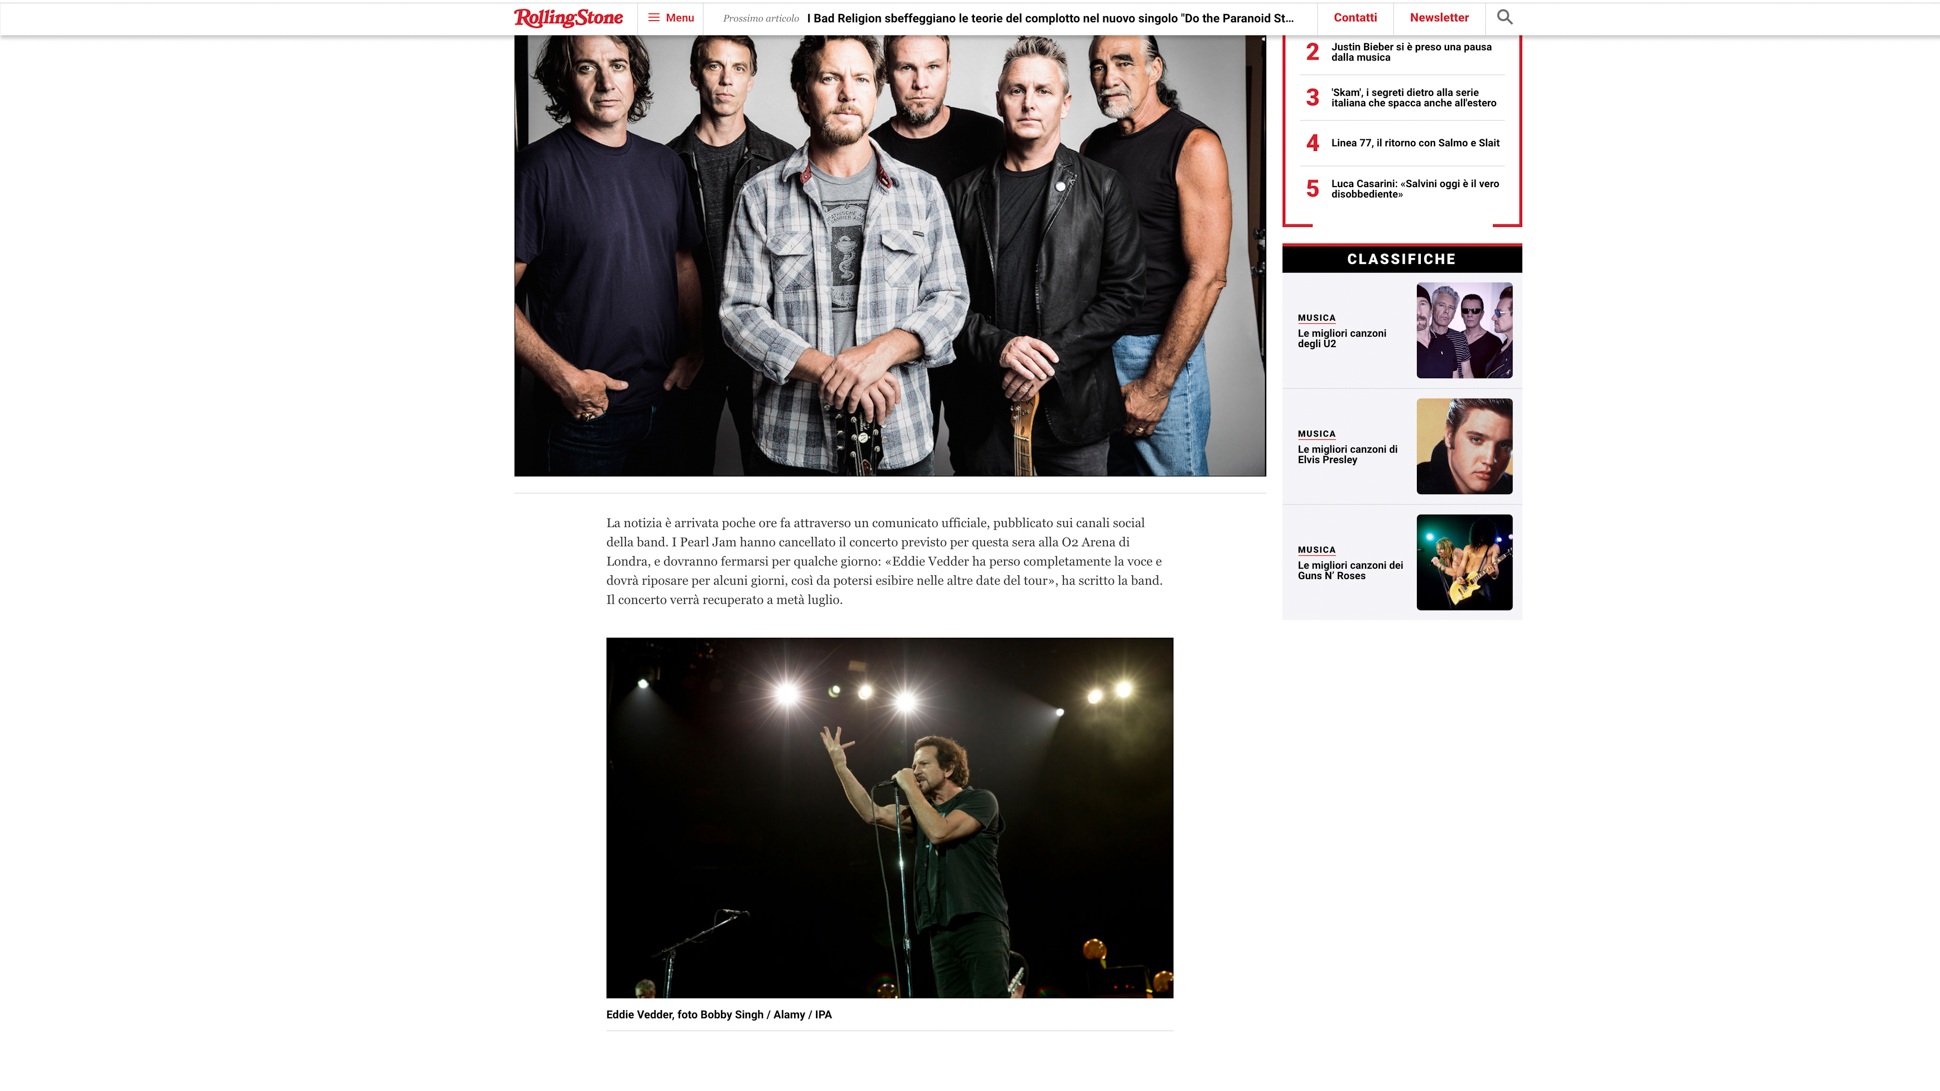 "Pearl Jam". Rolling Stone Italy. 06.19.2018